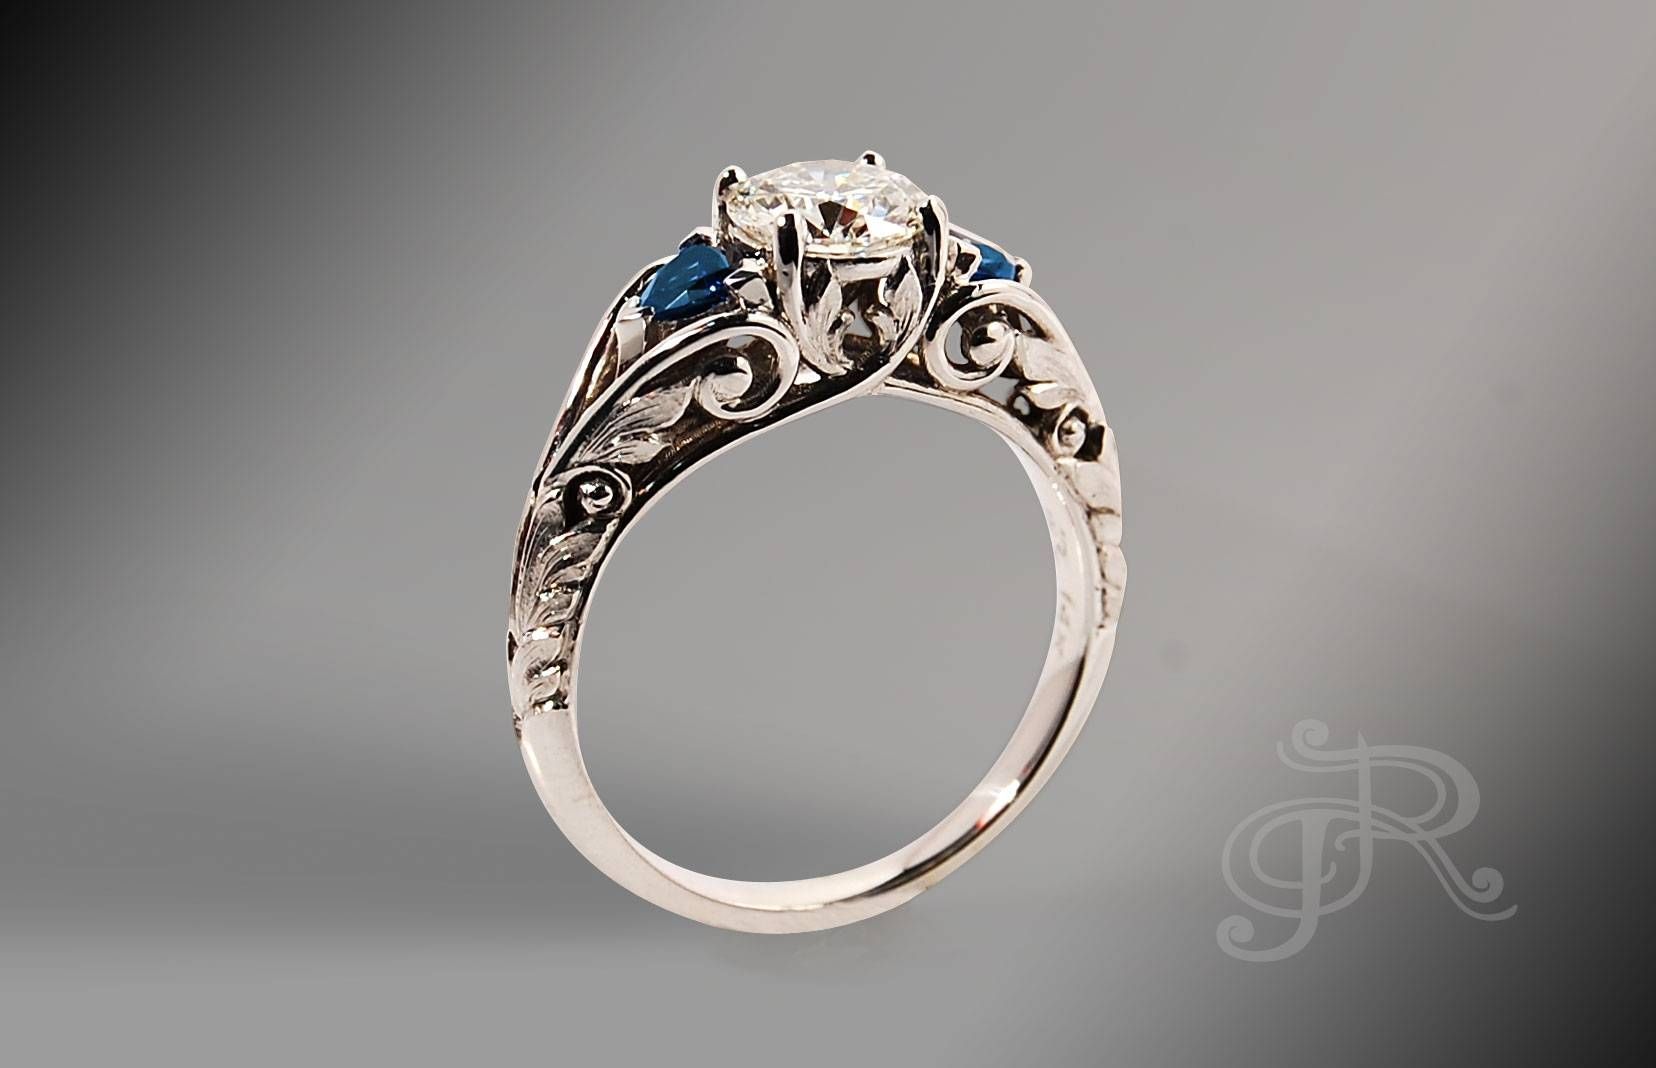 $100 3d Printed Engagement Ring Pertaining To Engagement Rings Without Stone (View 13 of 15)